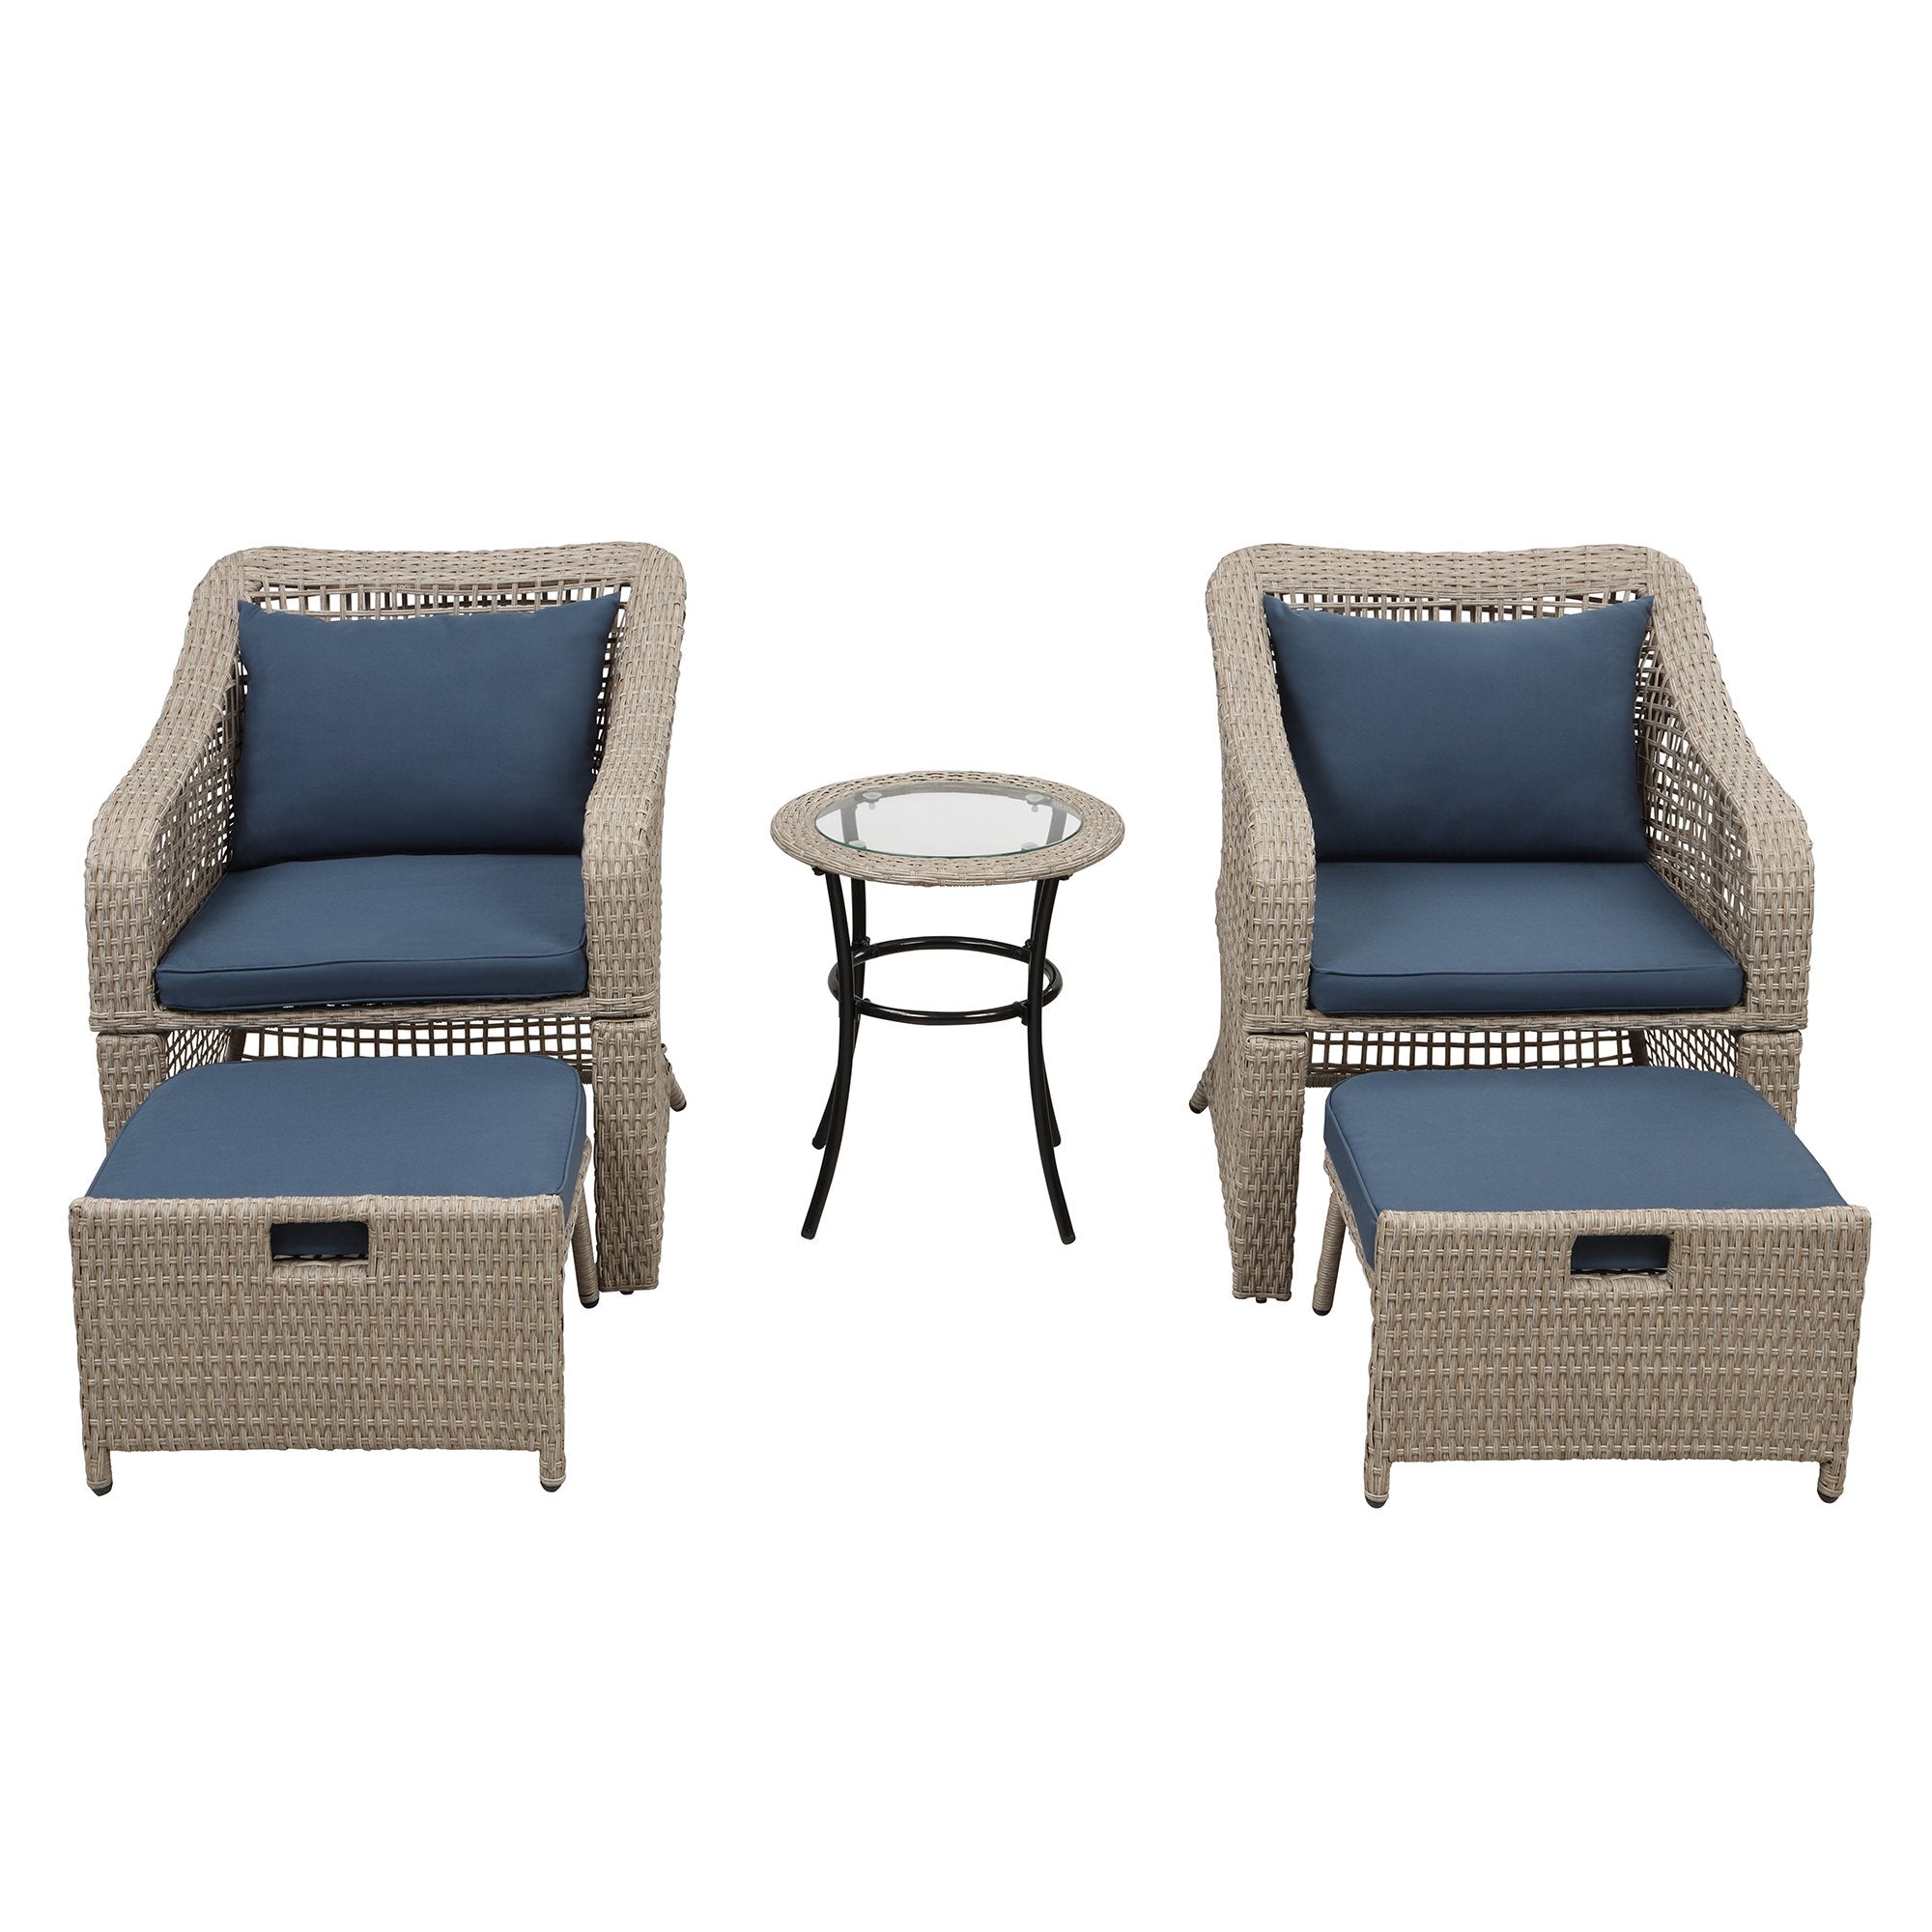 5-piece Outdoor Conversation Set Patio Furniture Set Bistro Set Rattan Wicker Chairs with Stools and Tempered Glass Table-Boyel Living